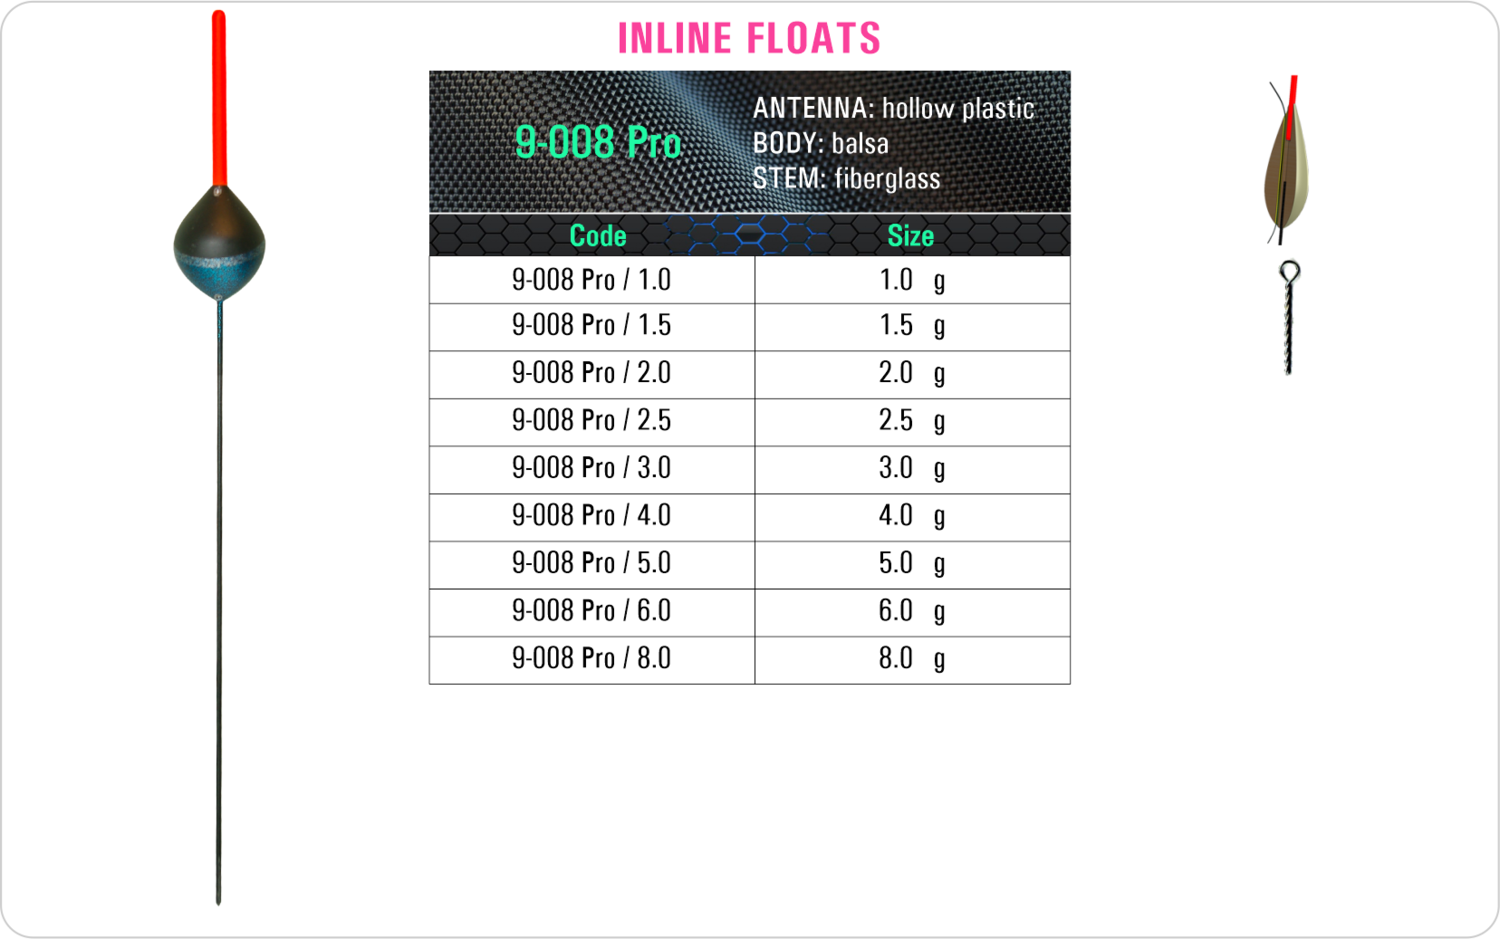 SF 9-008 Pro - Lake and river float model and table containing an additional information about this float with different codes, sizes, types of the body, the stem and the antenna of the float.